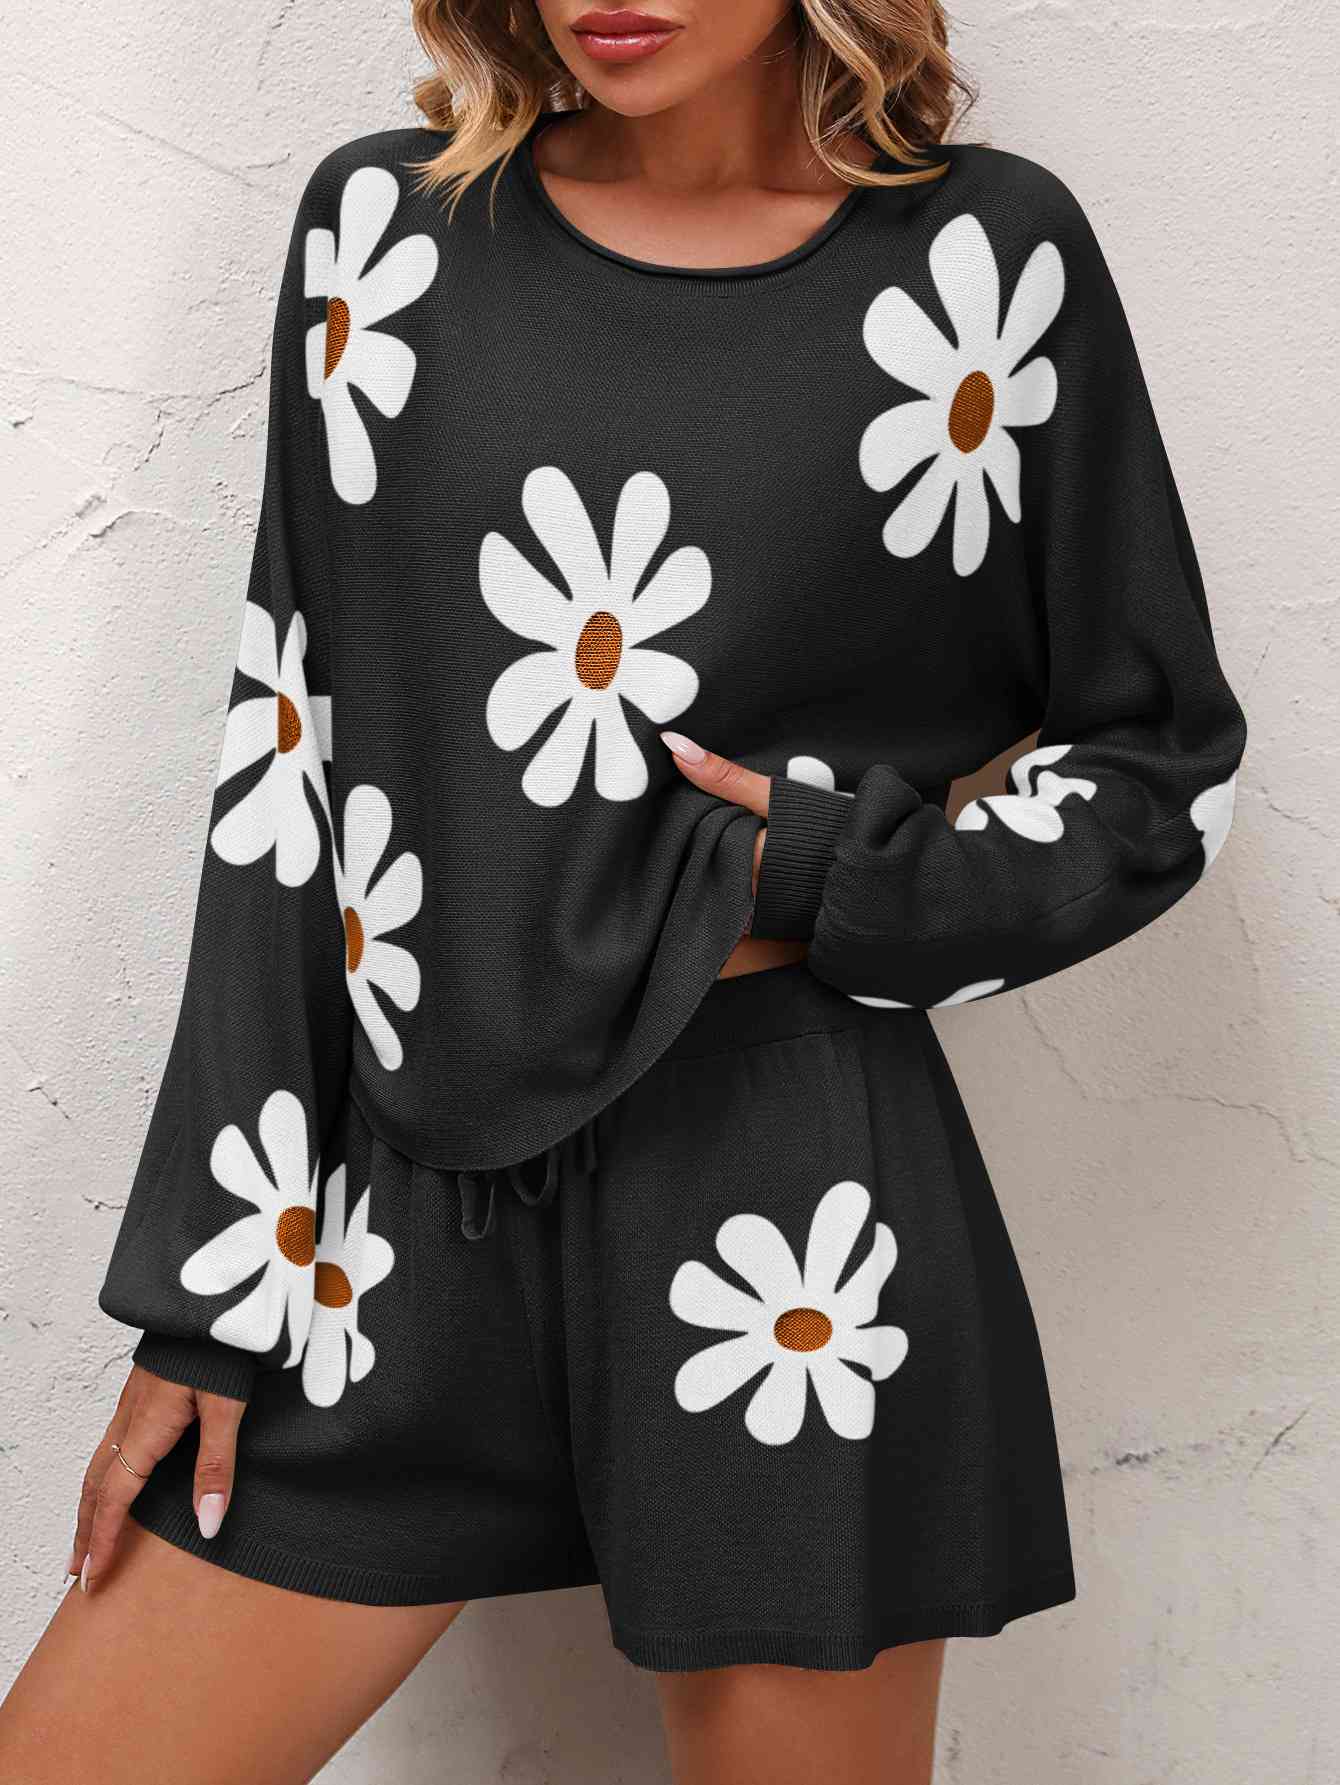 Women's Floral Print Raglan Sleeve Knit Top and Tie Front Sweater Shorts Set